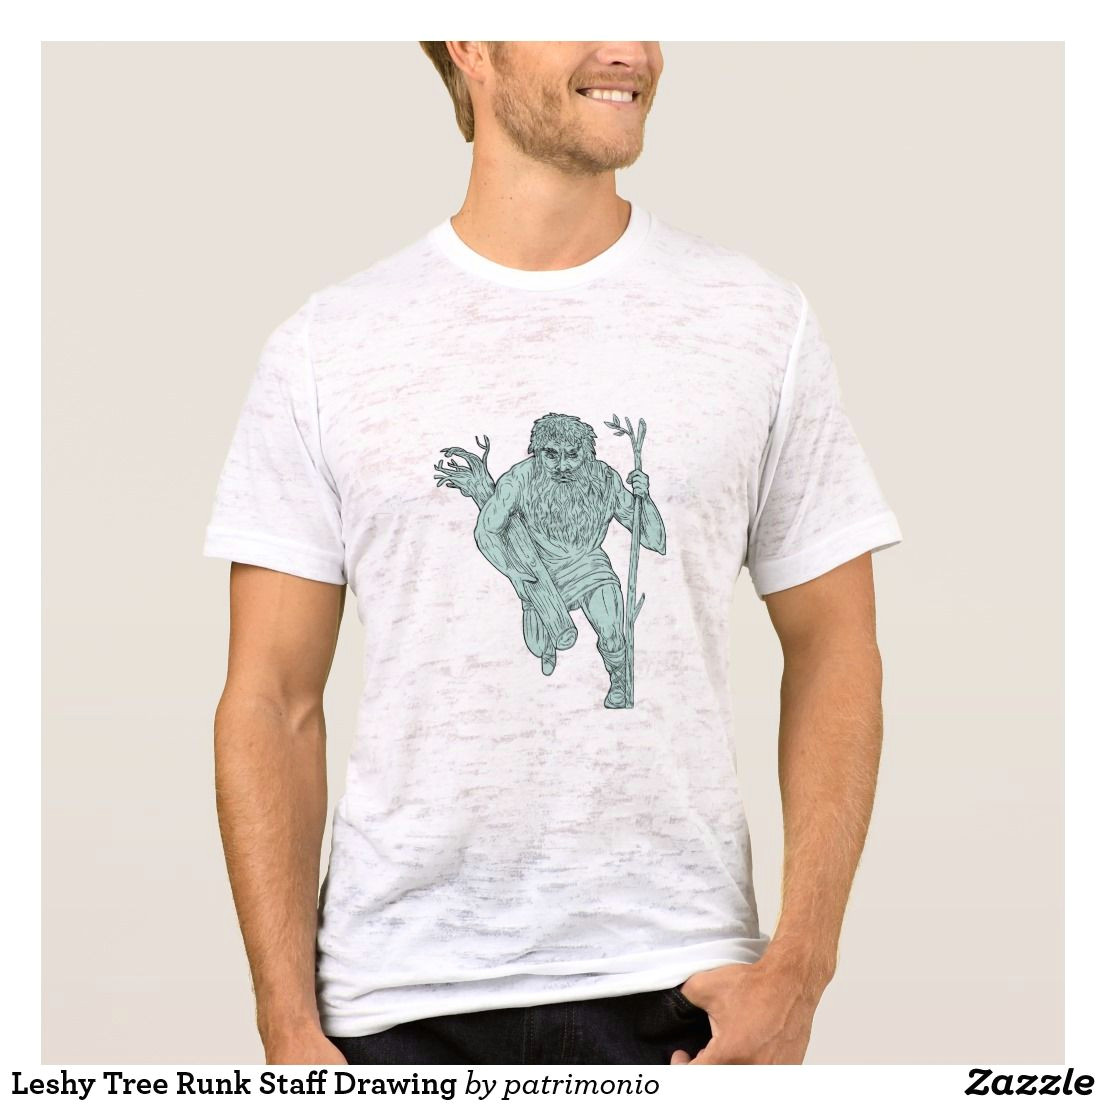 T Shirt Drawing Ideas Leshy Tree Runk Staff Drawing Men S Burnout T Shirt Designed with A